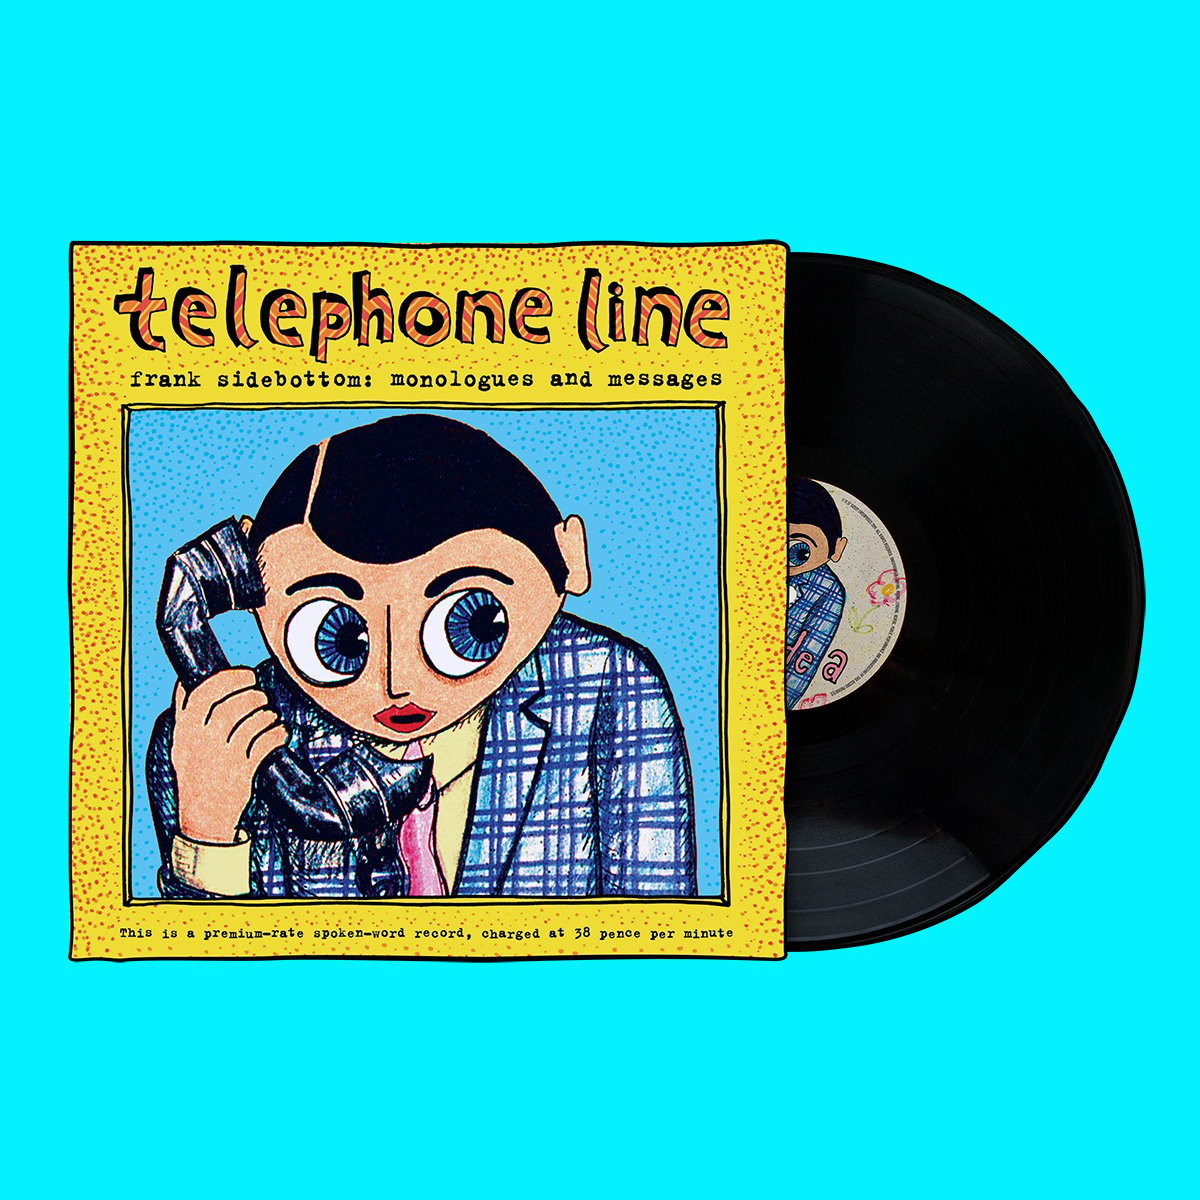 Image of “Telephone Line: Monologues and Messages” Record Album